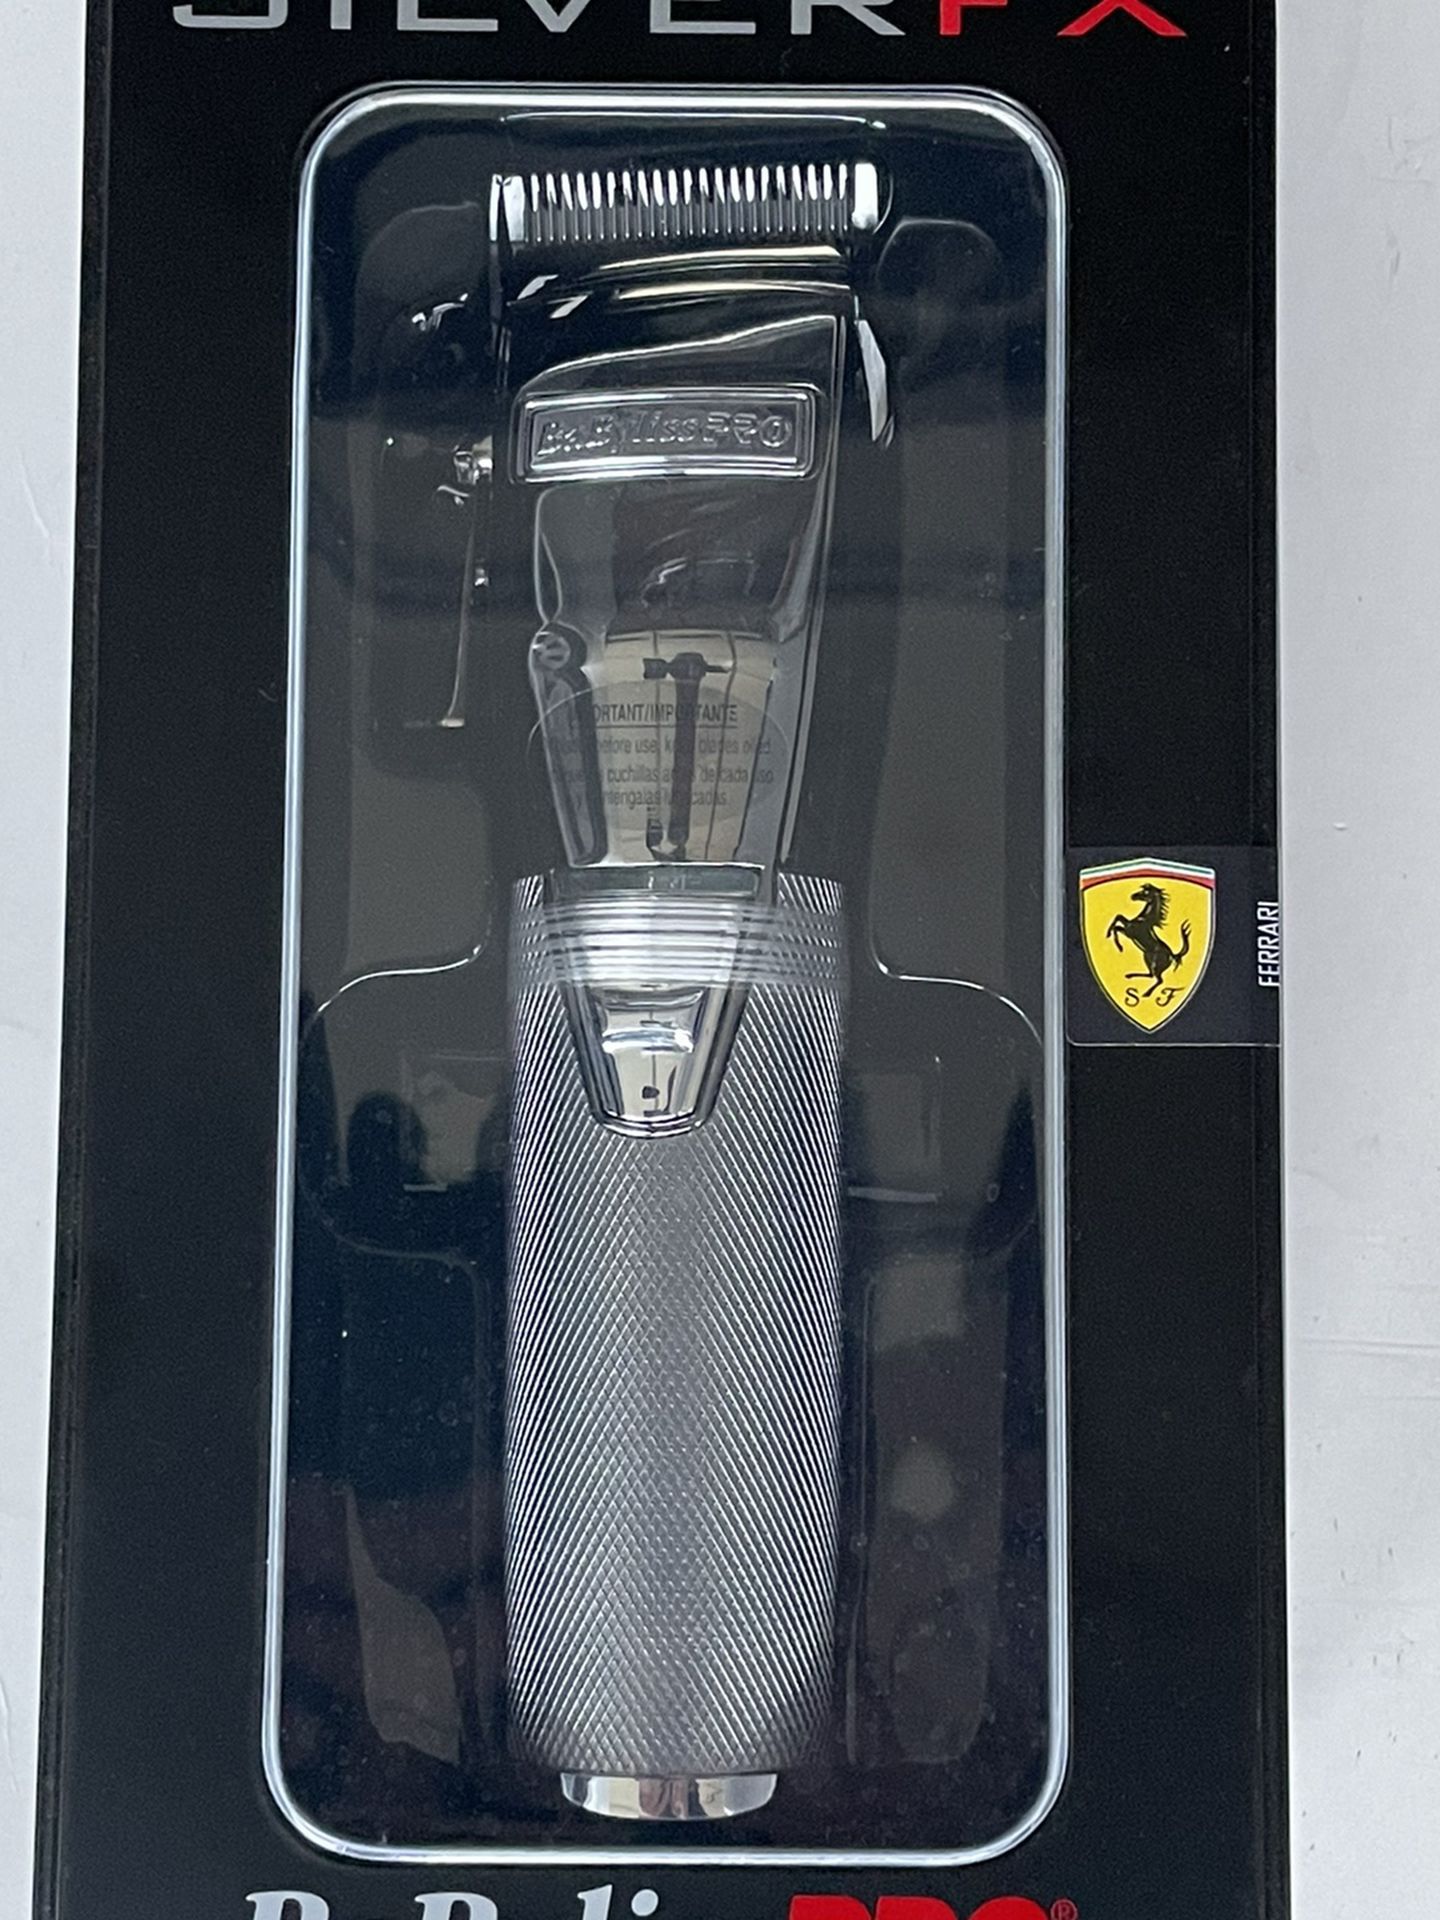 SILVERFX is a cord/cordless lithium clipper, equipped with a high-torque, brushless, Ferrari-designed engine.